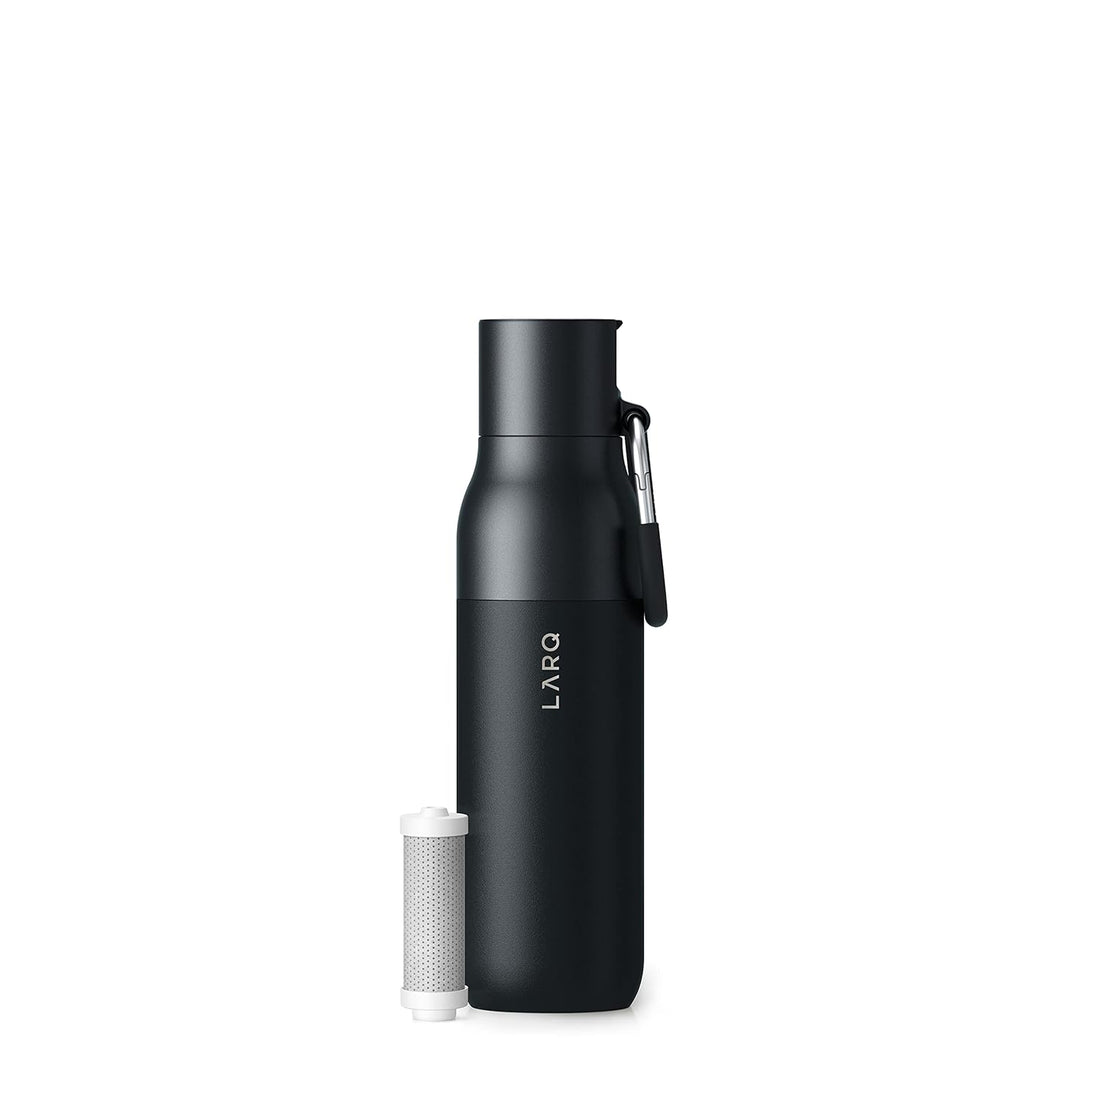 LARQ Bottle Filtered - Insulated Stainless Steel Water Bottle BPA Free with Nano Zero technology and long-lasting filters, Obsidian Black, 17oz